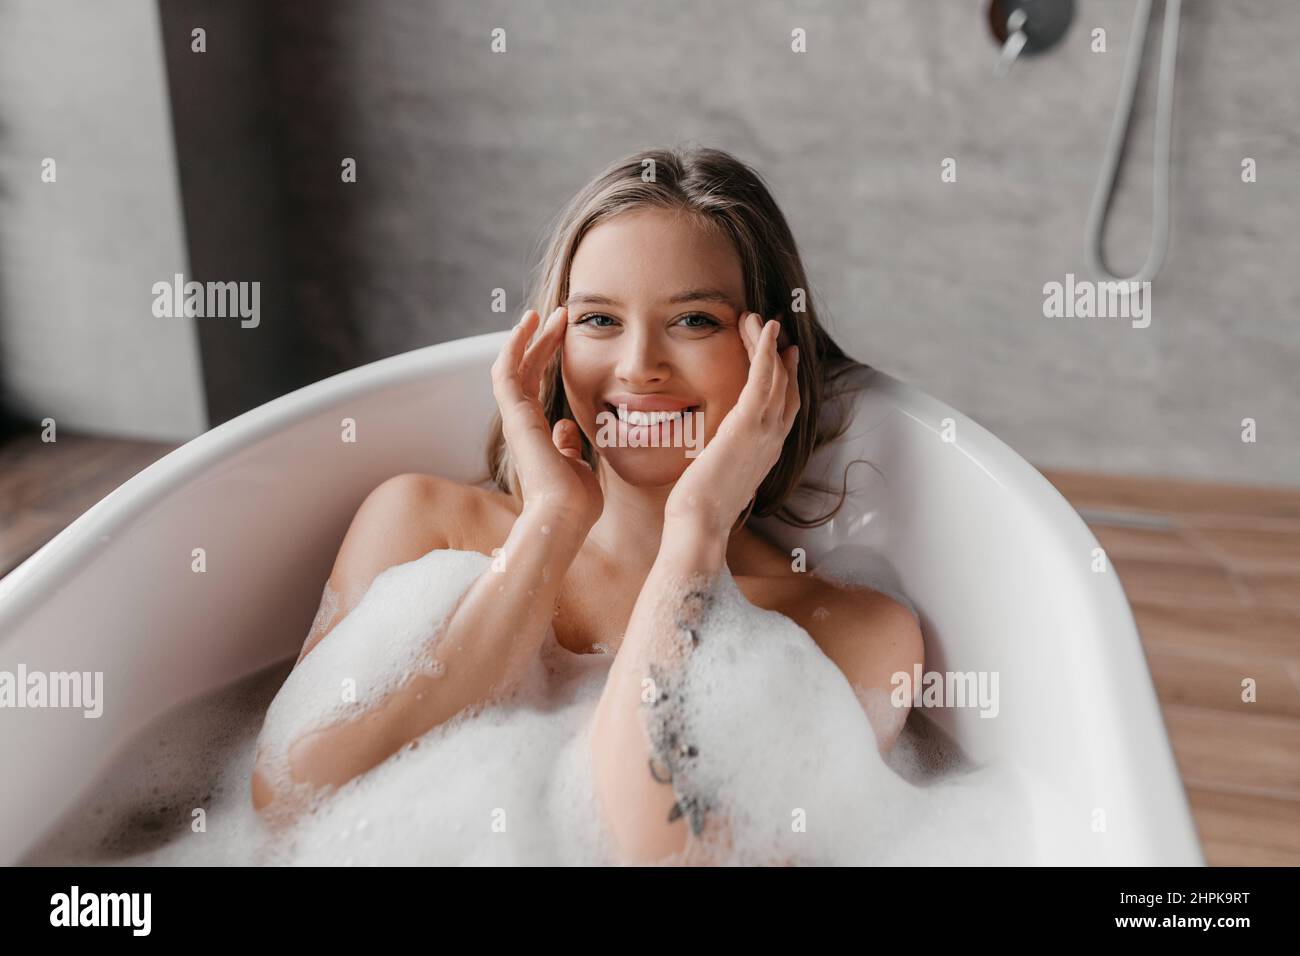 Skin care and spa treatments at home. Happy relaxed lady in bathtub with foam, touching her smooth face skin and smiling Stock Photo